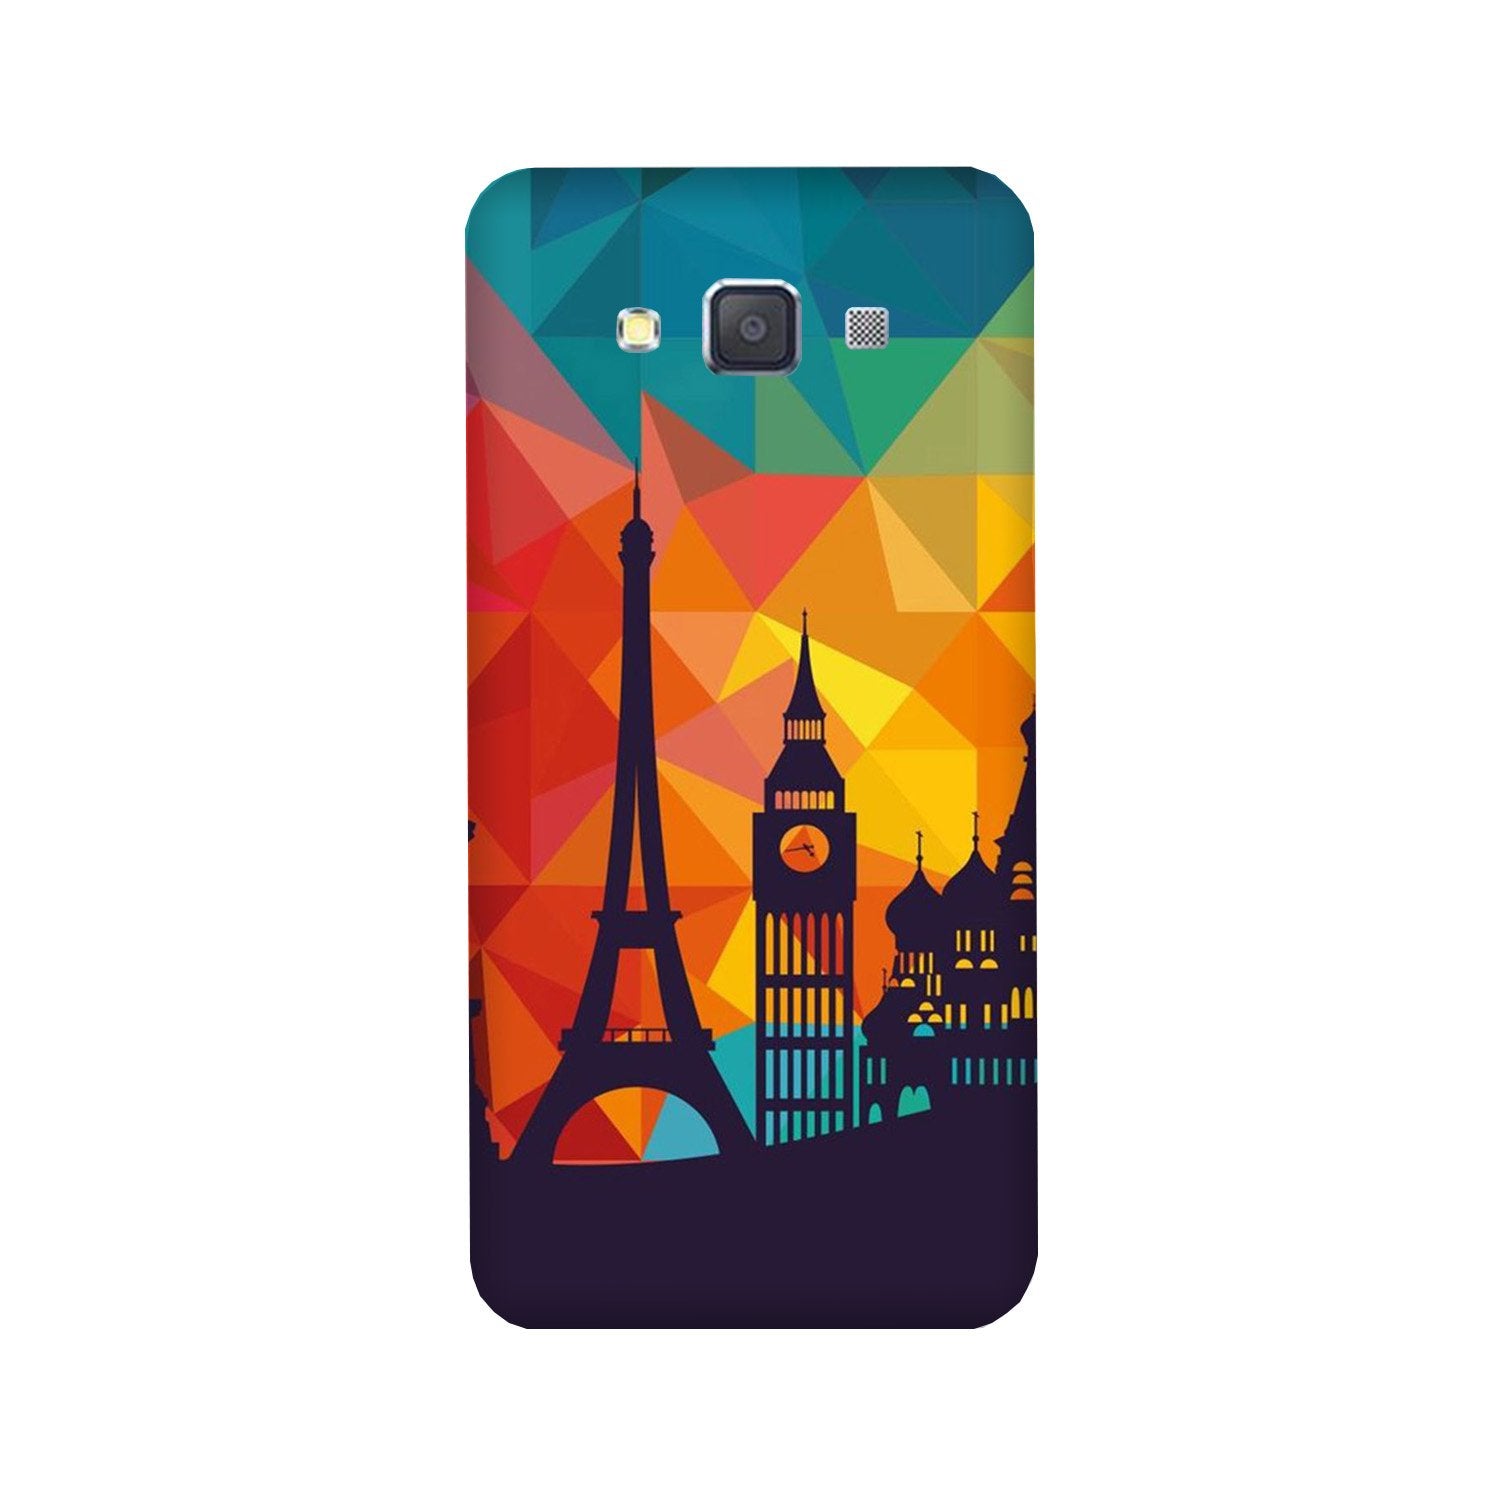 Eiffel Tower2 Case for Galaxy ON7/ON7 Pro